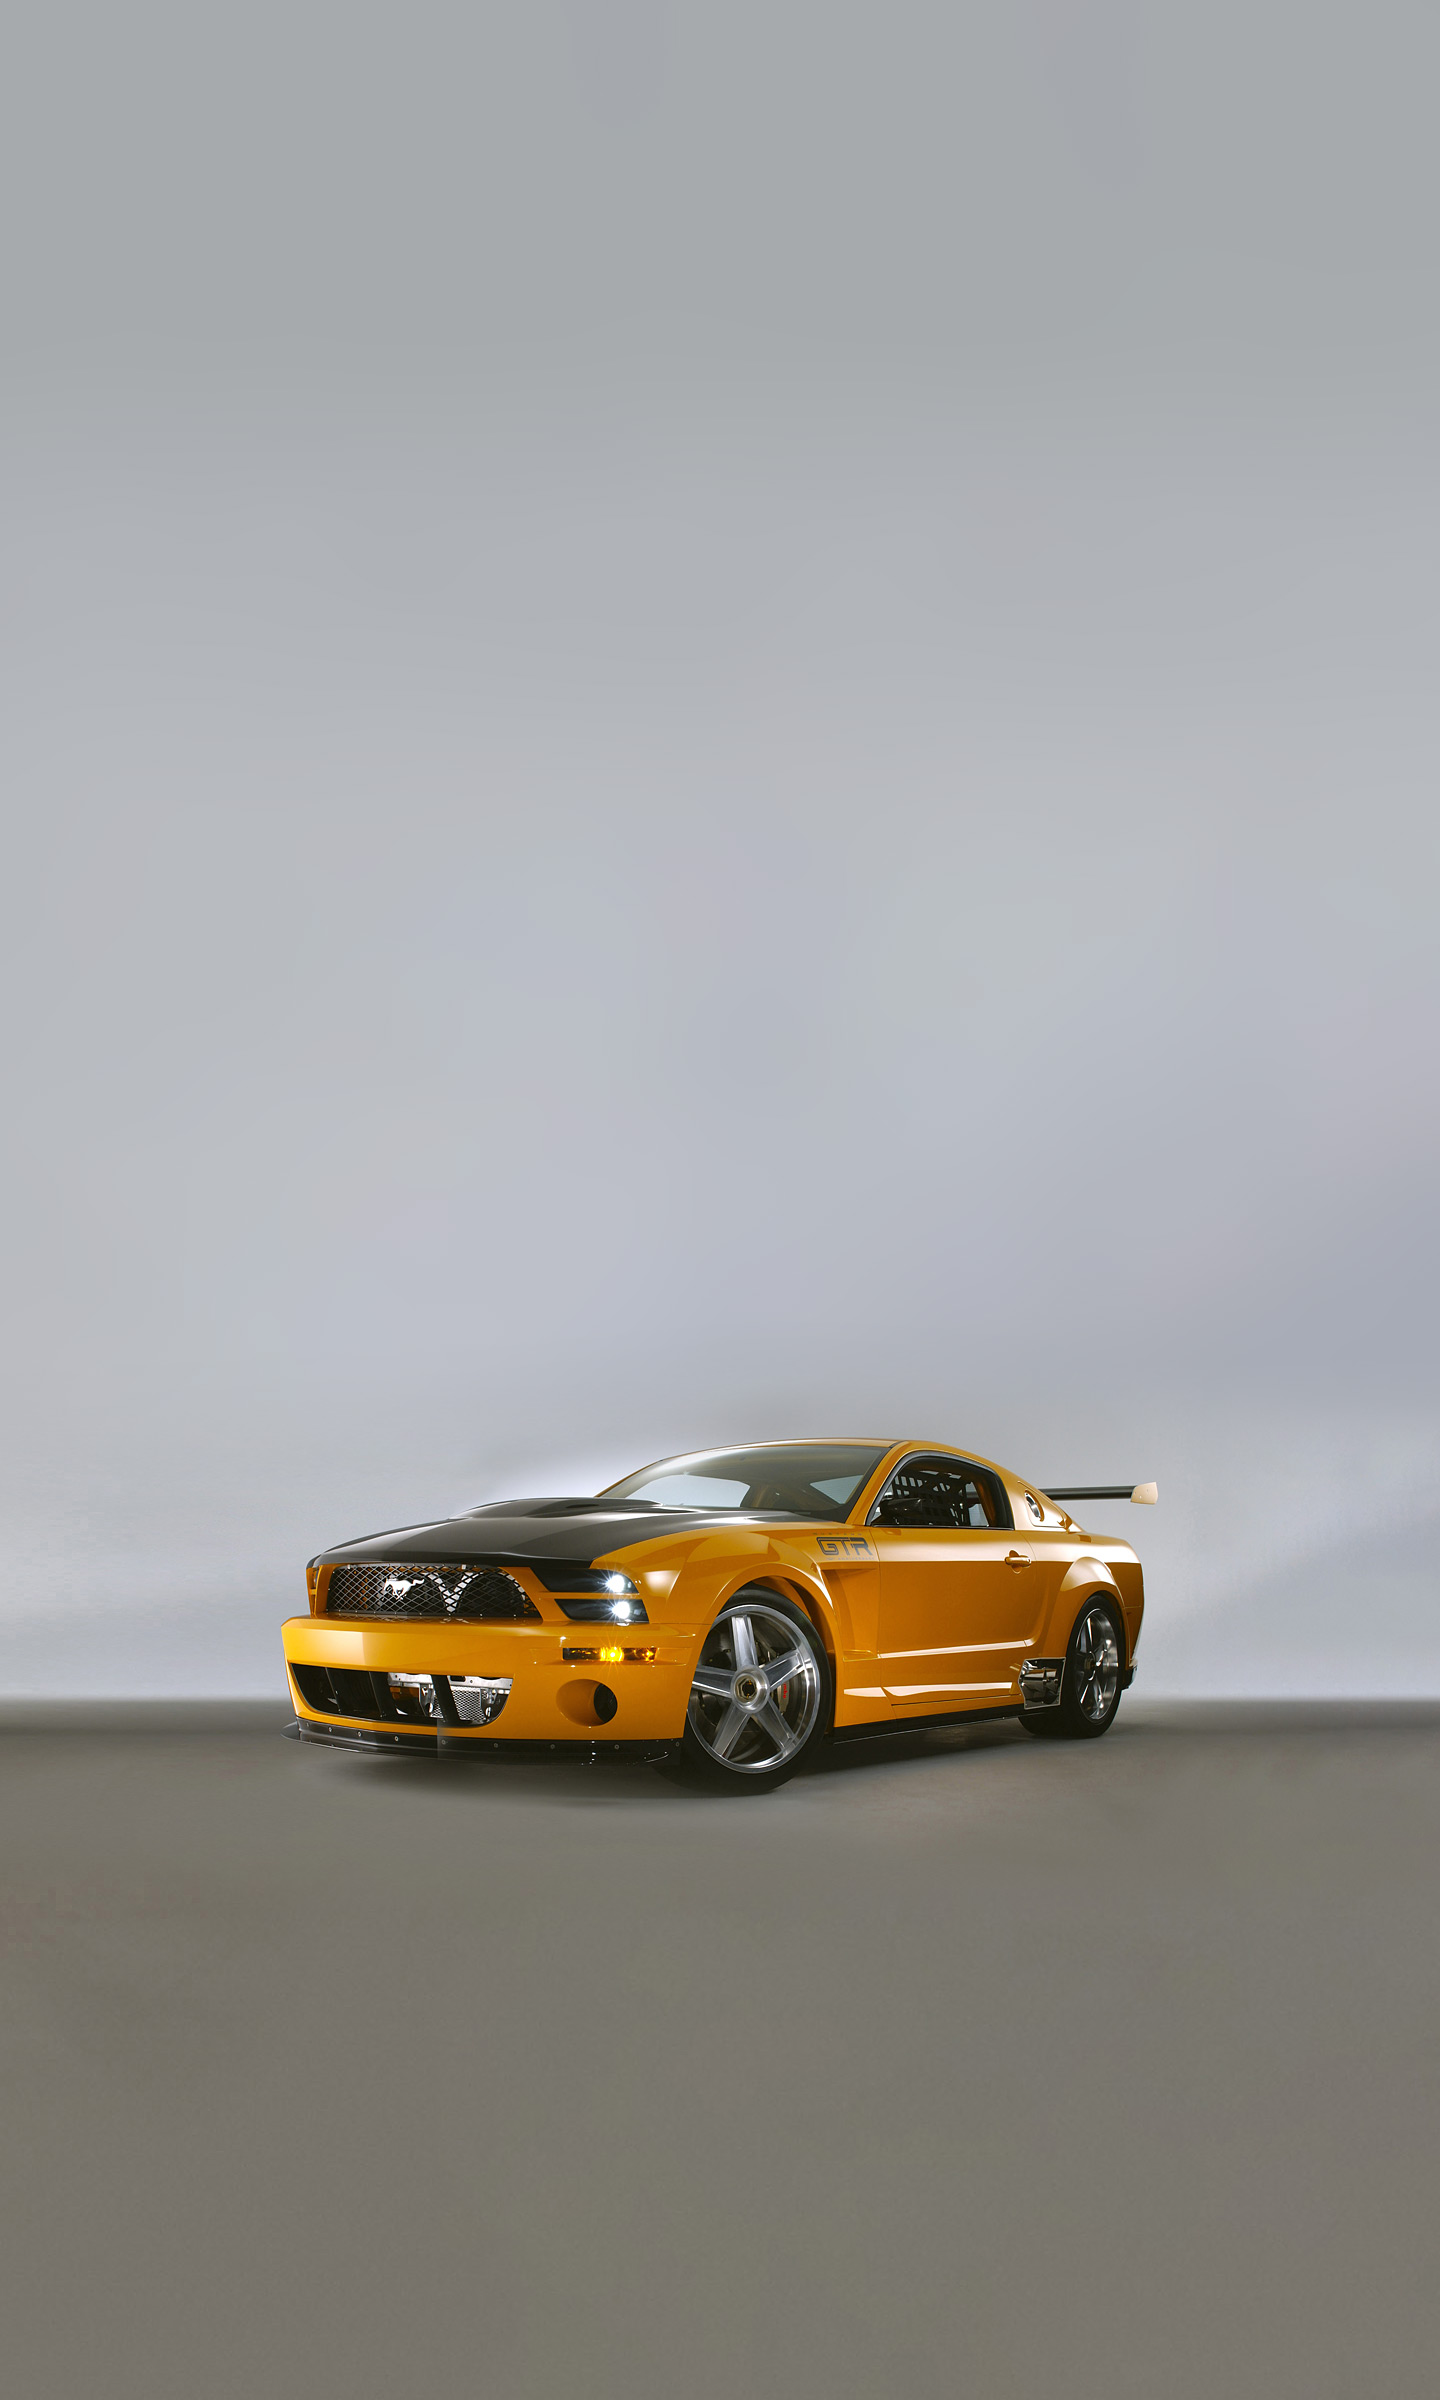  2004 Ford Mustang GT-R Concept Wallpaper.